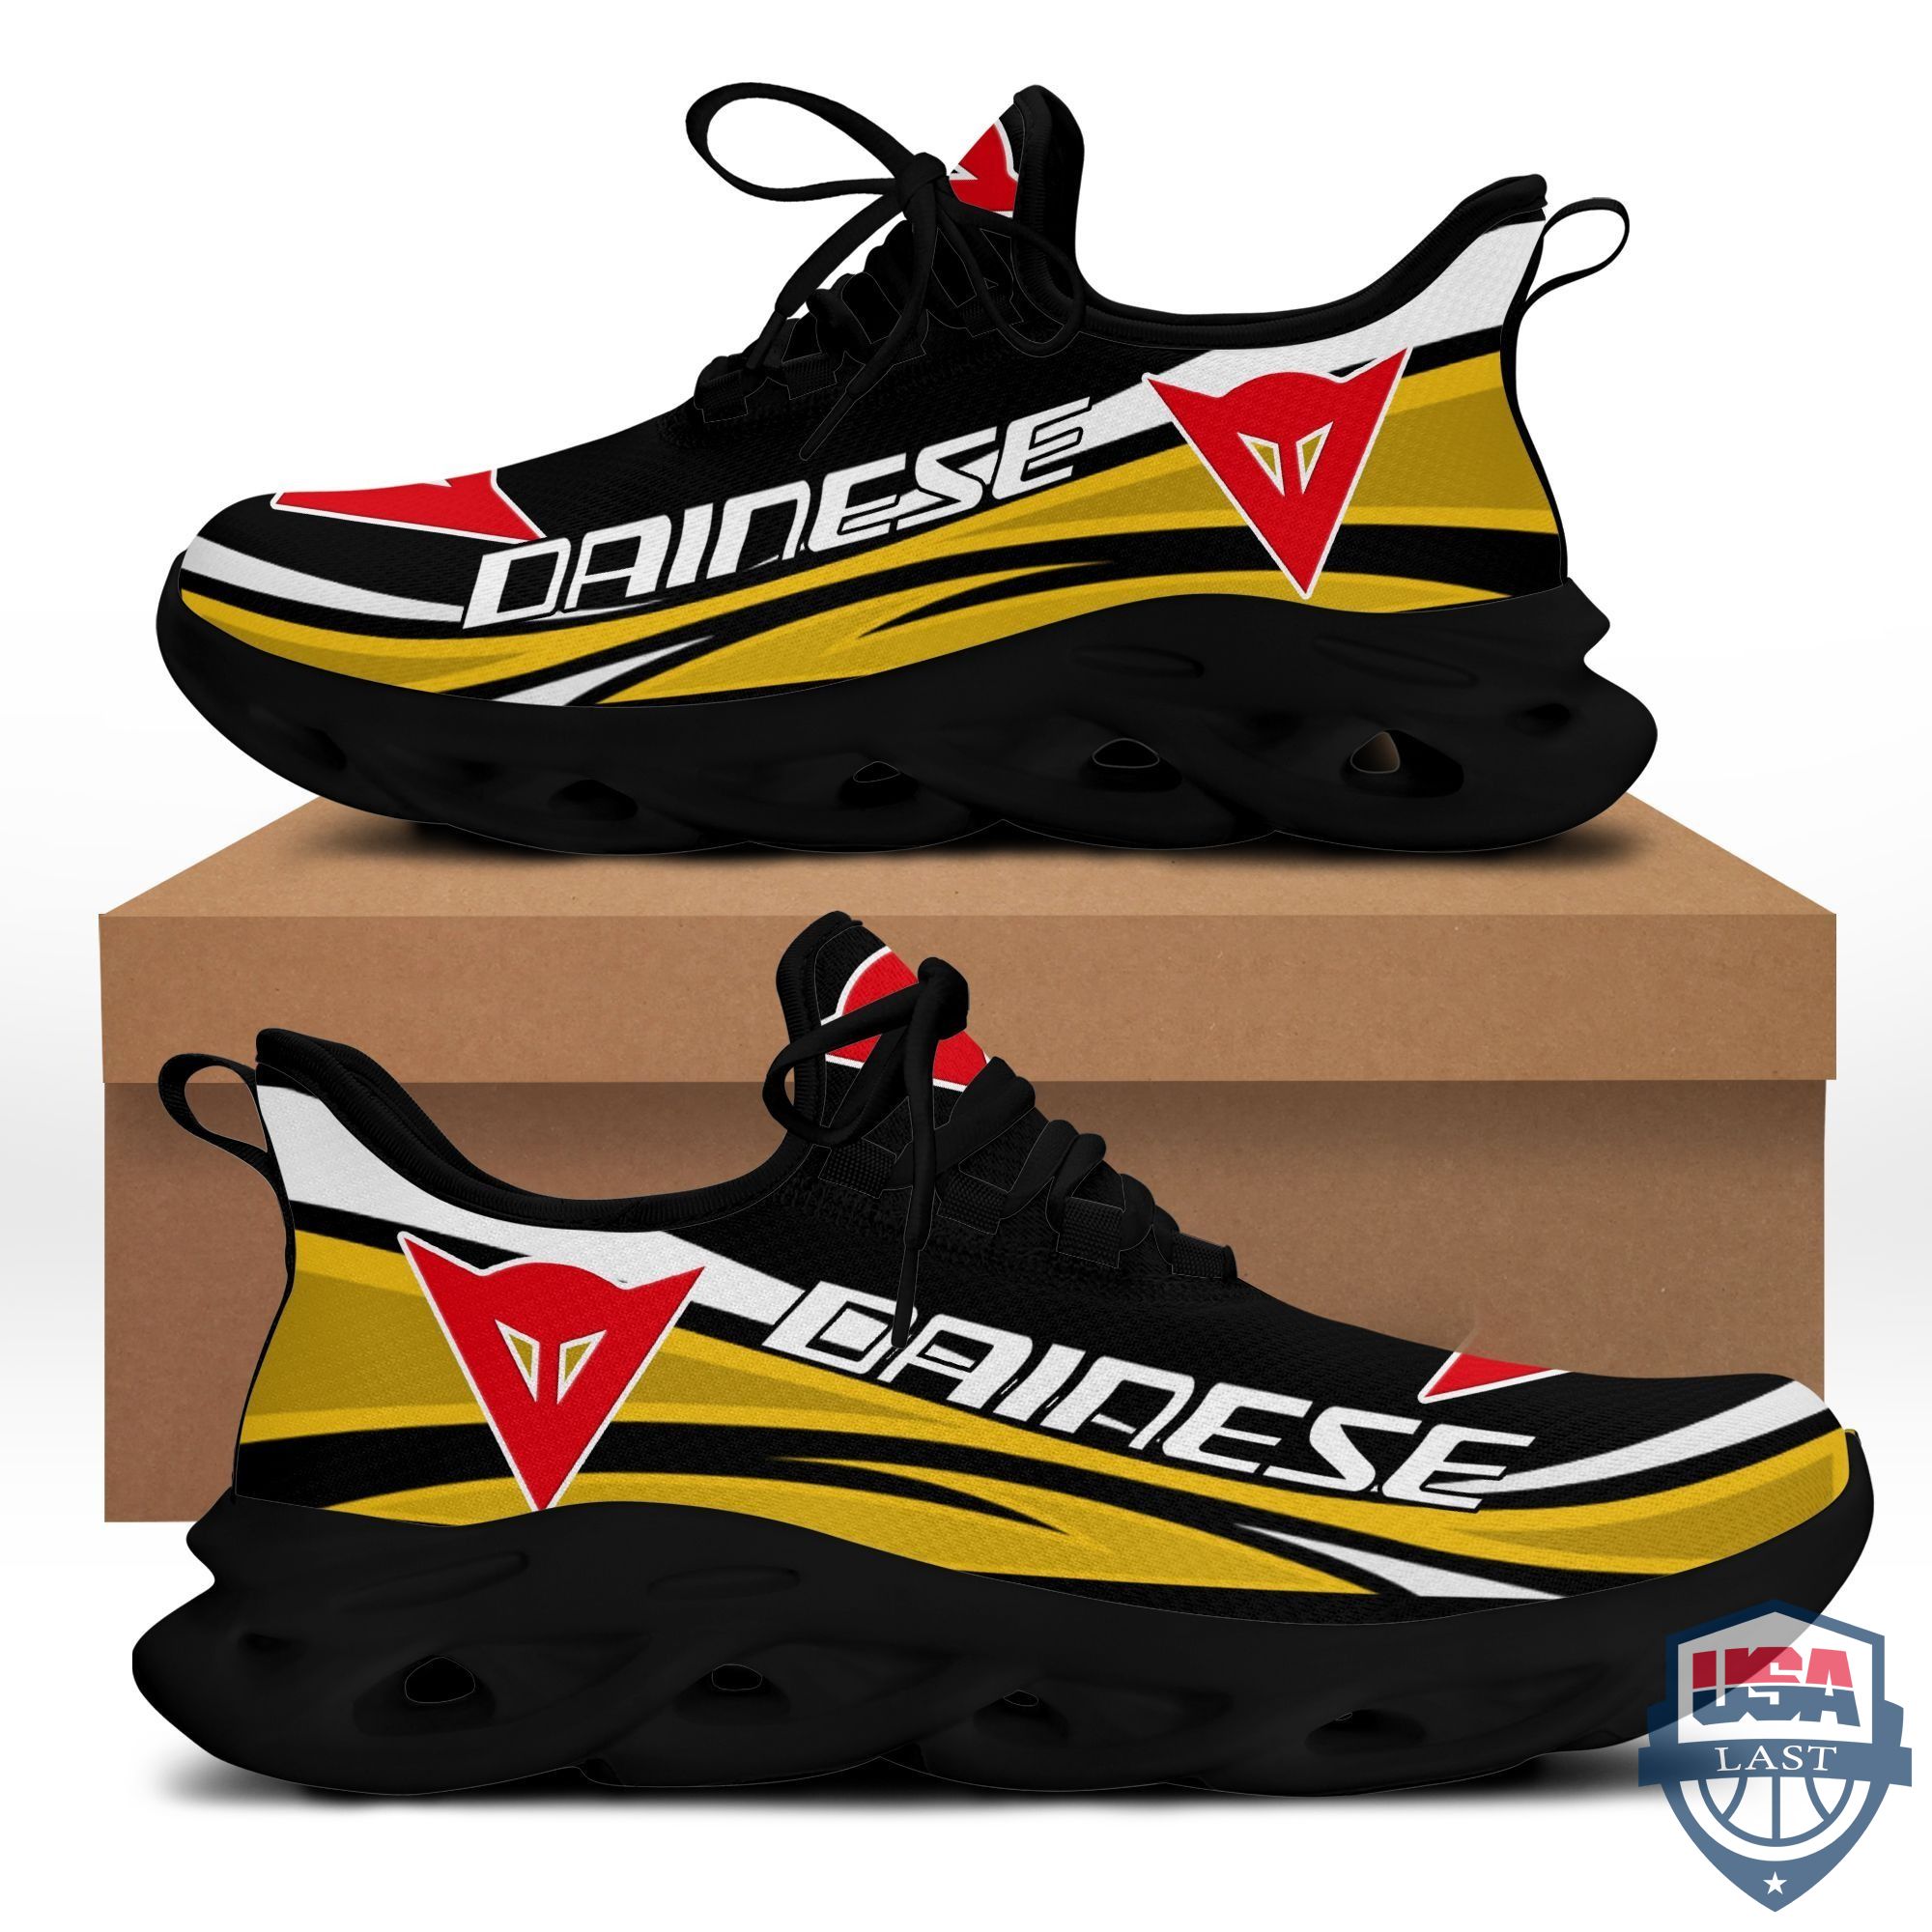 Dainese Sport Sneaker Running Shoes Yellow Version